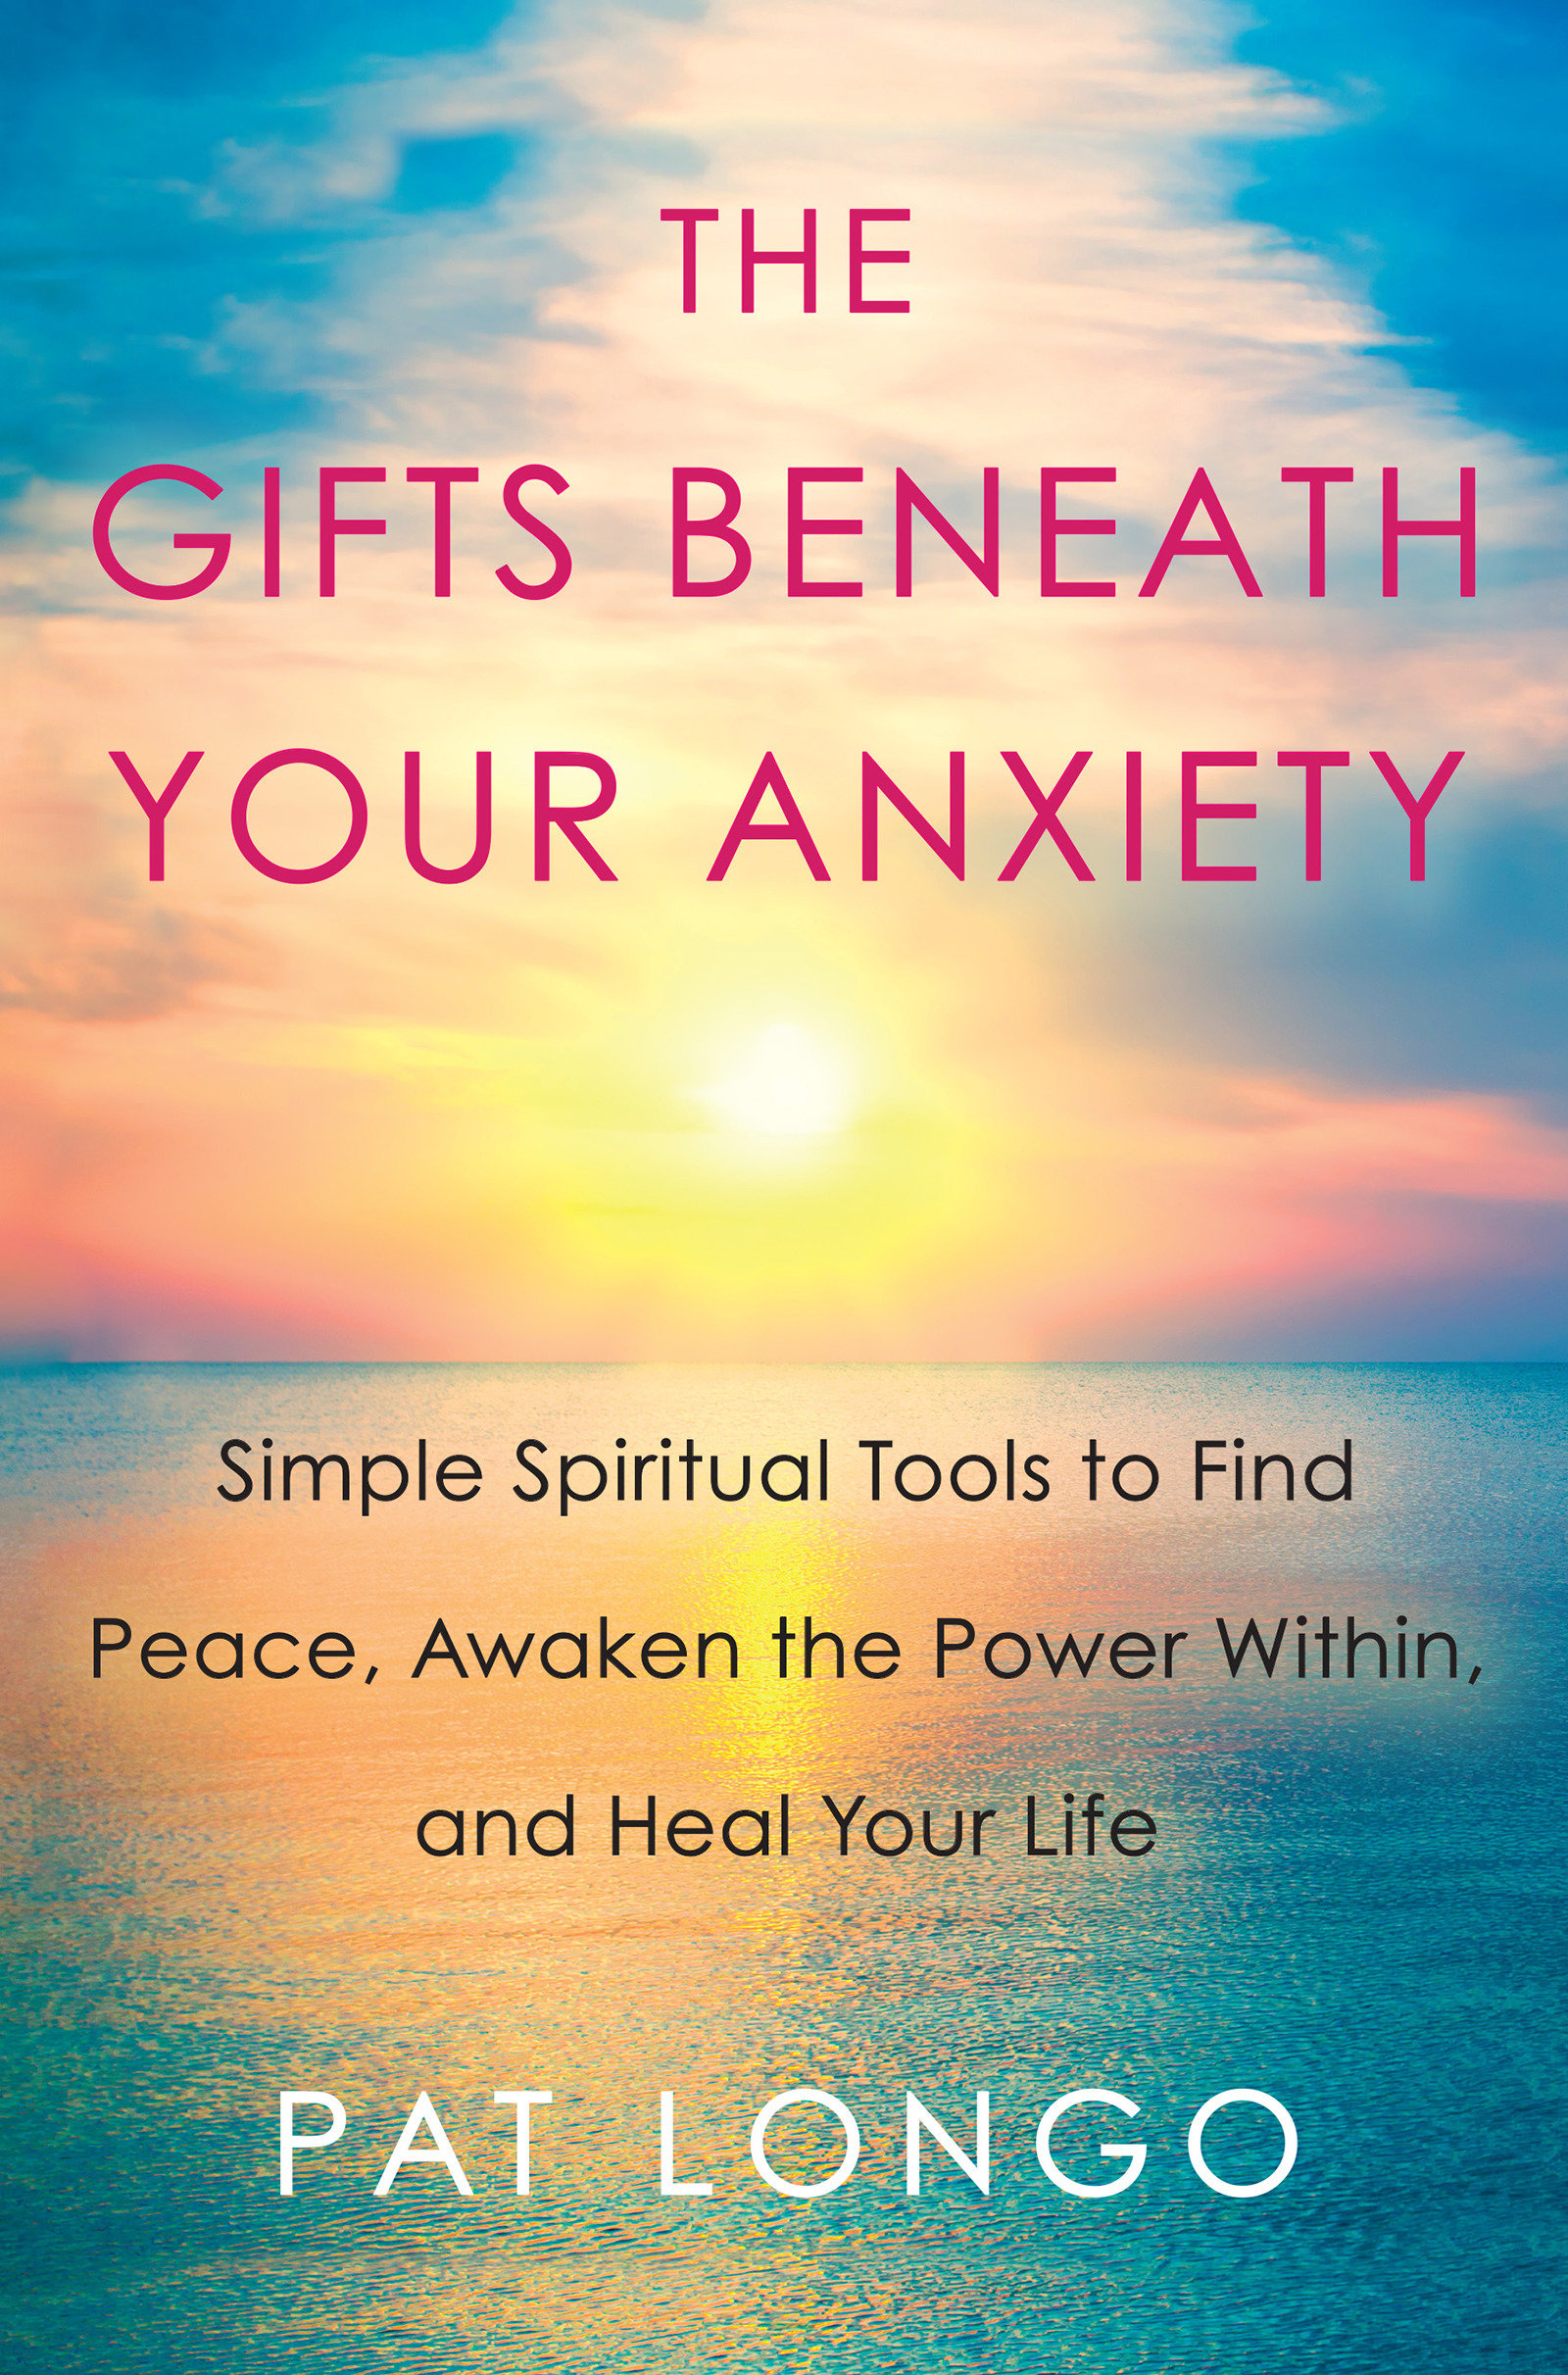 The Gifts Beneath Your Anxiety (Hardcover Book)